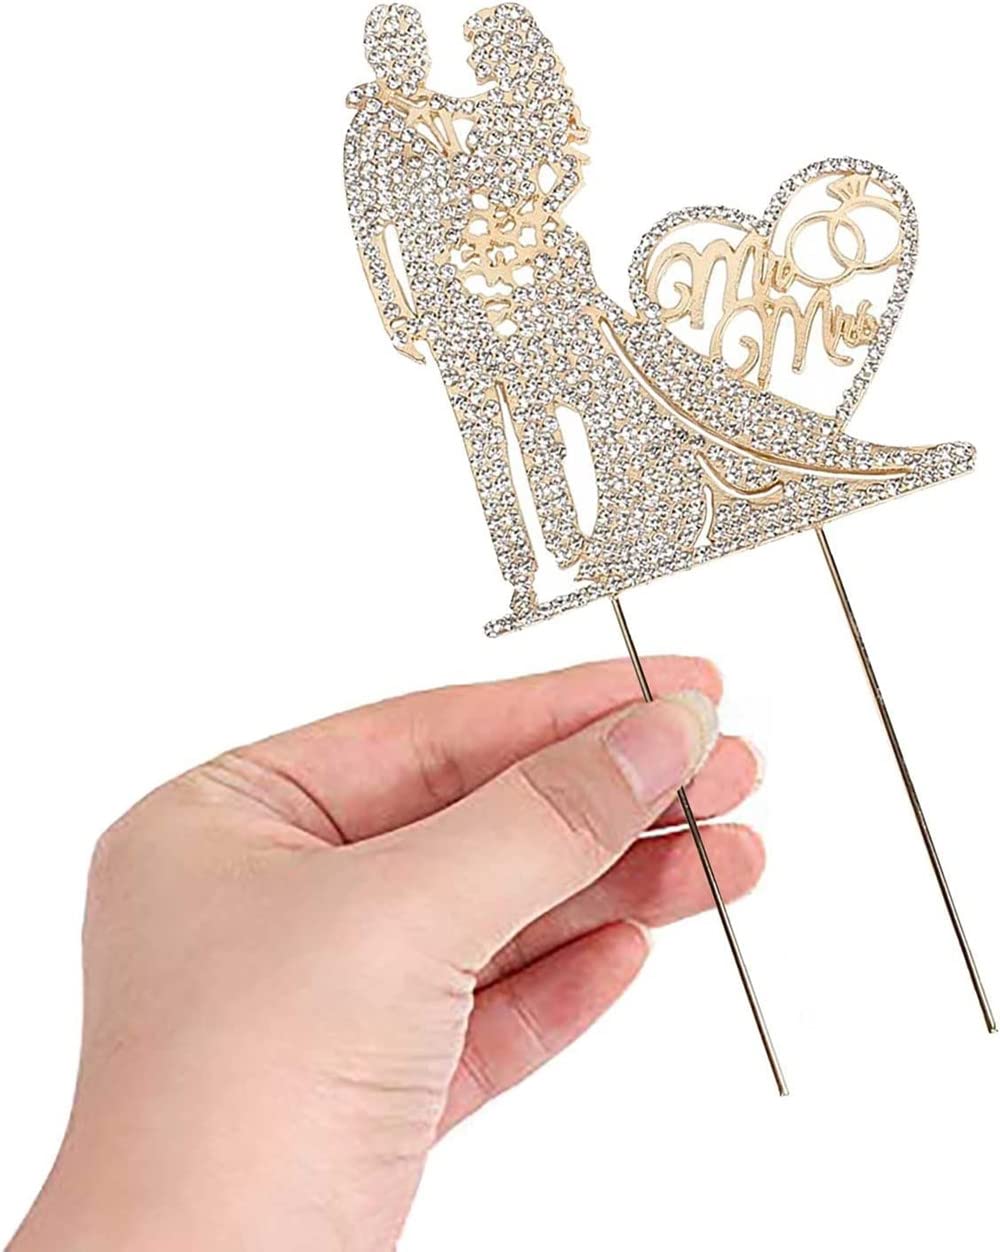 KIPETTO Mr and Mrs Wedding Cake Topper Sparkly Crystal Alloy Rhinestone Bride and Groom Love Heart Couple Cake Topper for Wedding Anniversary Proposal Engagement Party (Type A)